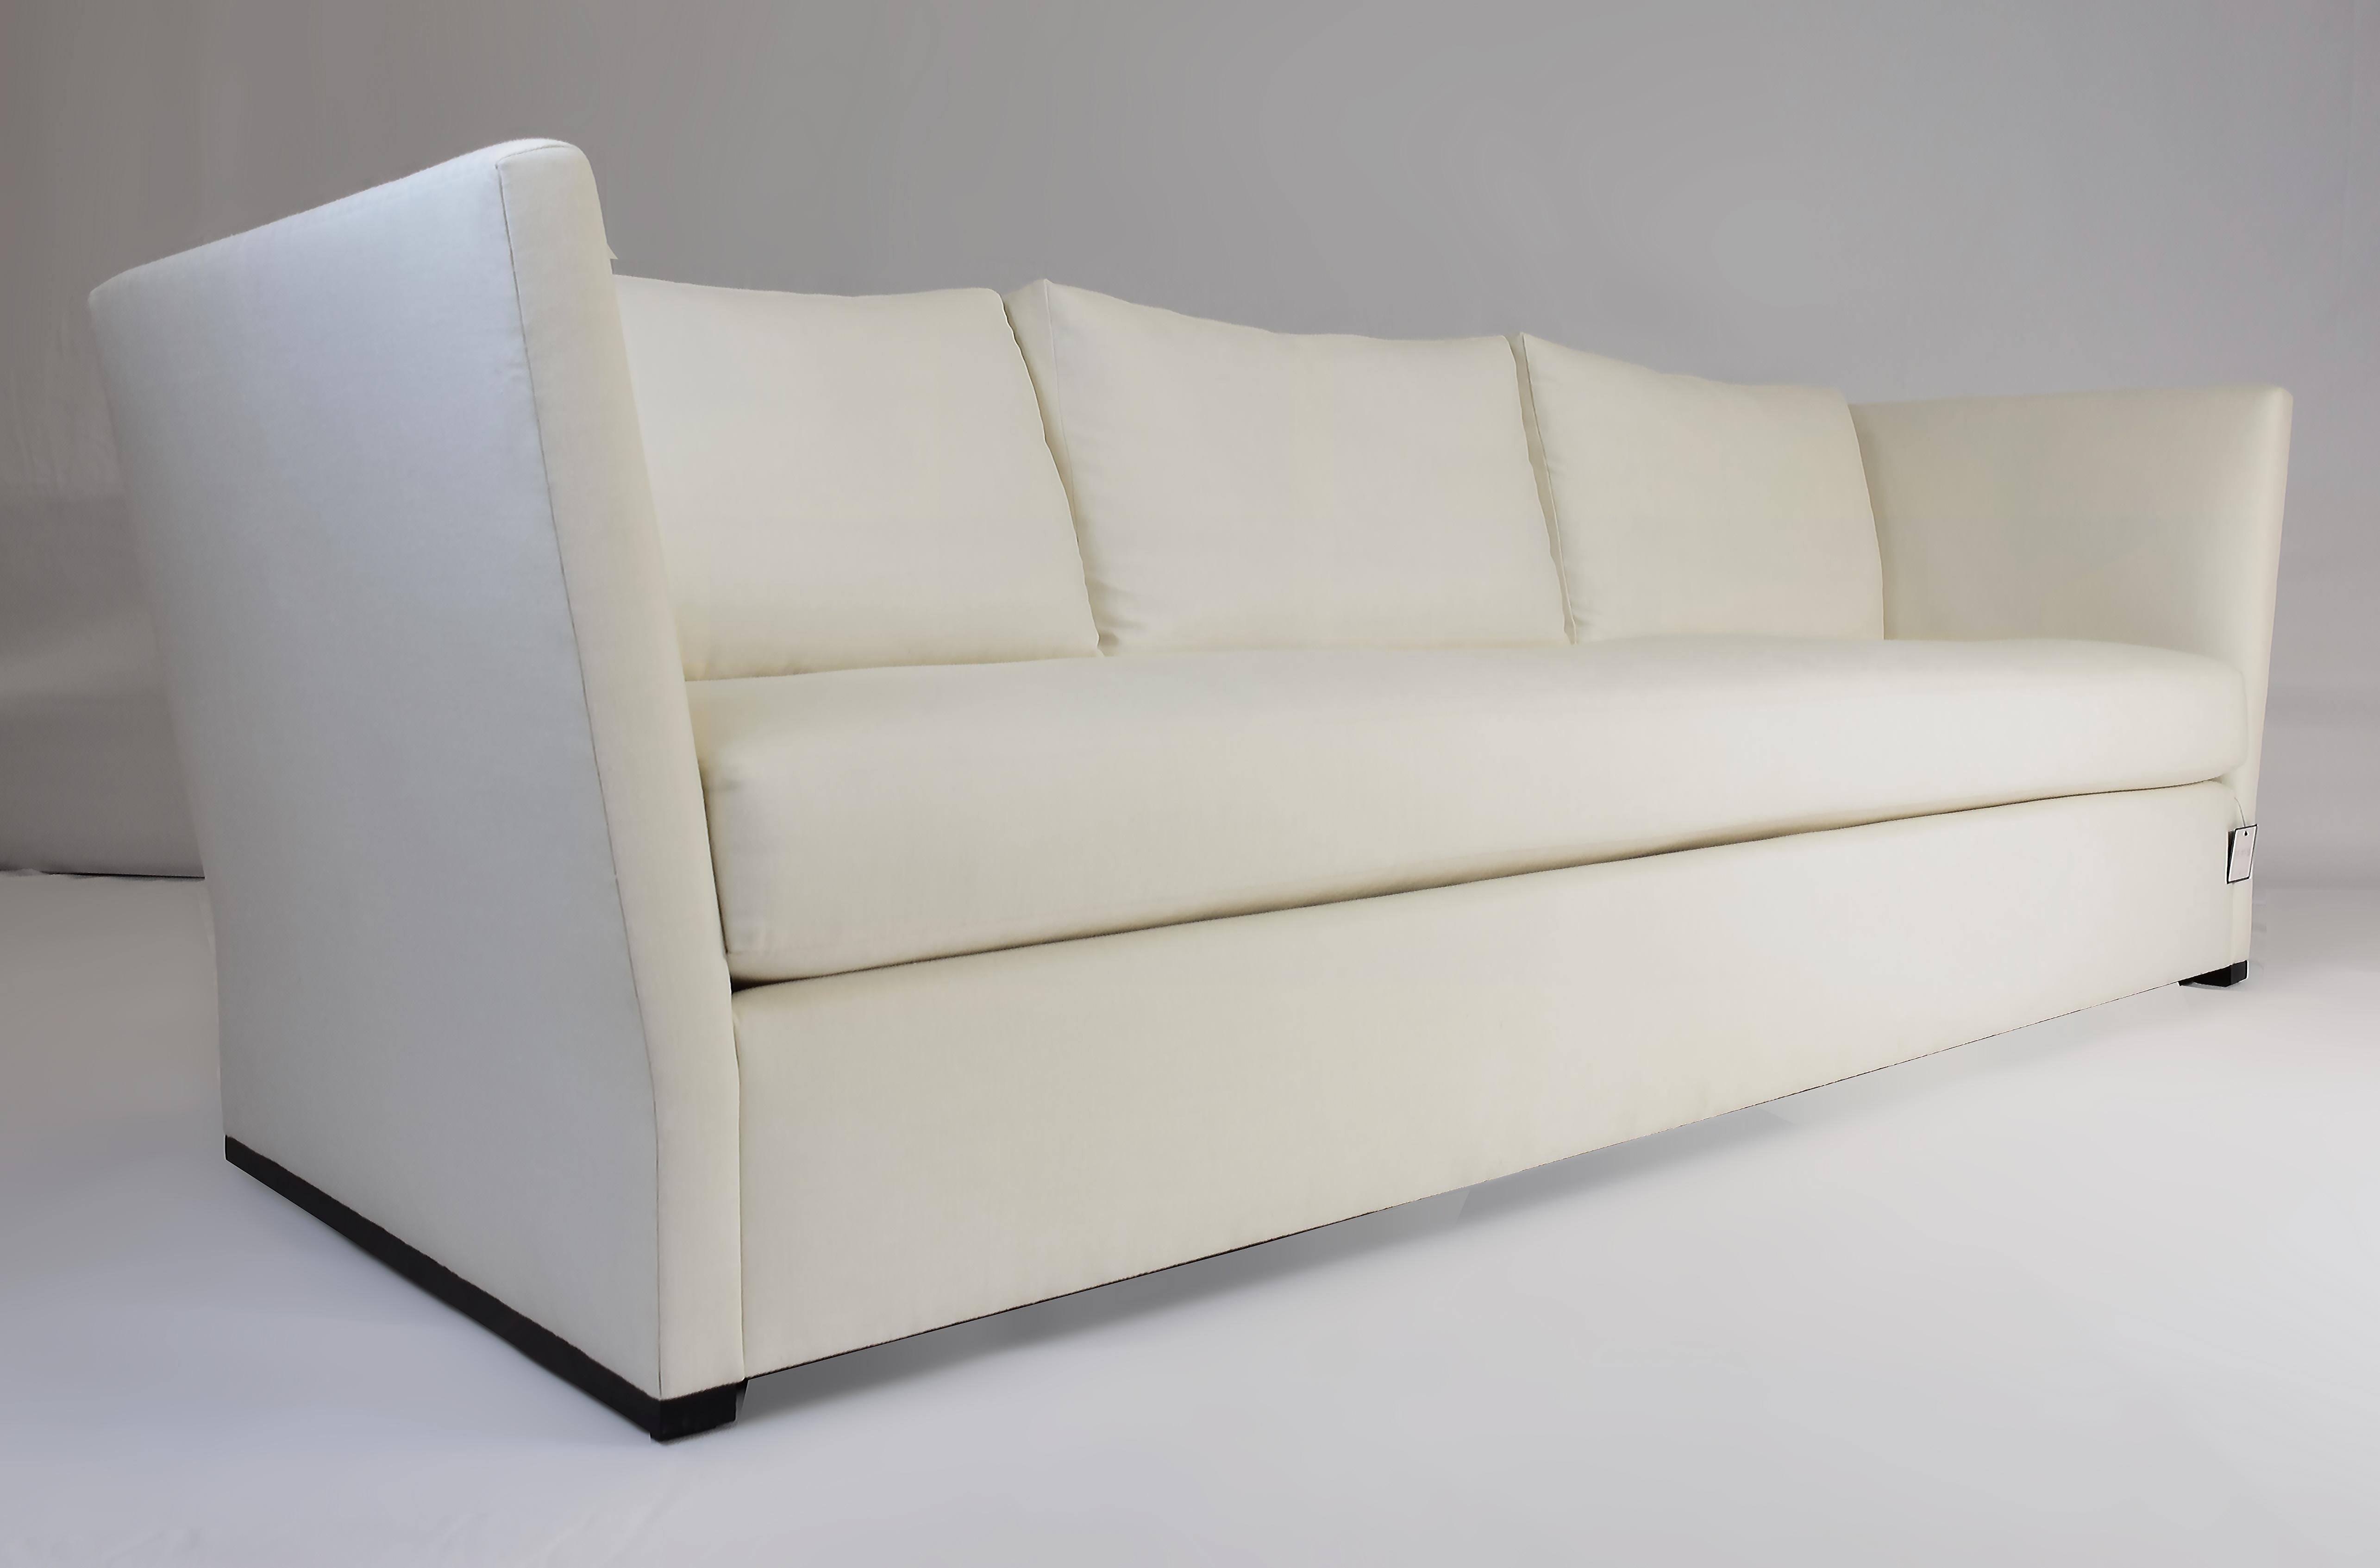 Le Jeune Upholstery Jones Angled Arm Sofa Showroom Model

Offered for sale is a truly classic styled Sofa with outward angled arms to simulate their being on a hinge, however,  they are fixed. The long bench seat cushion is made with an